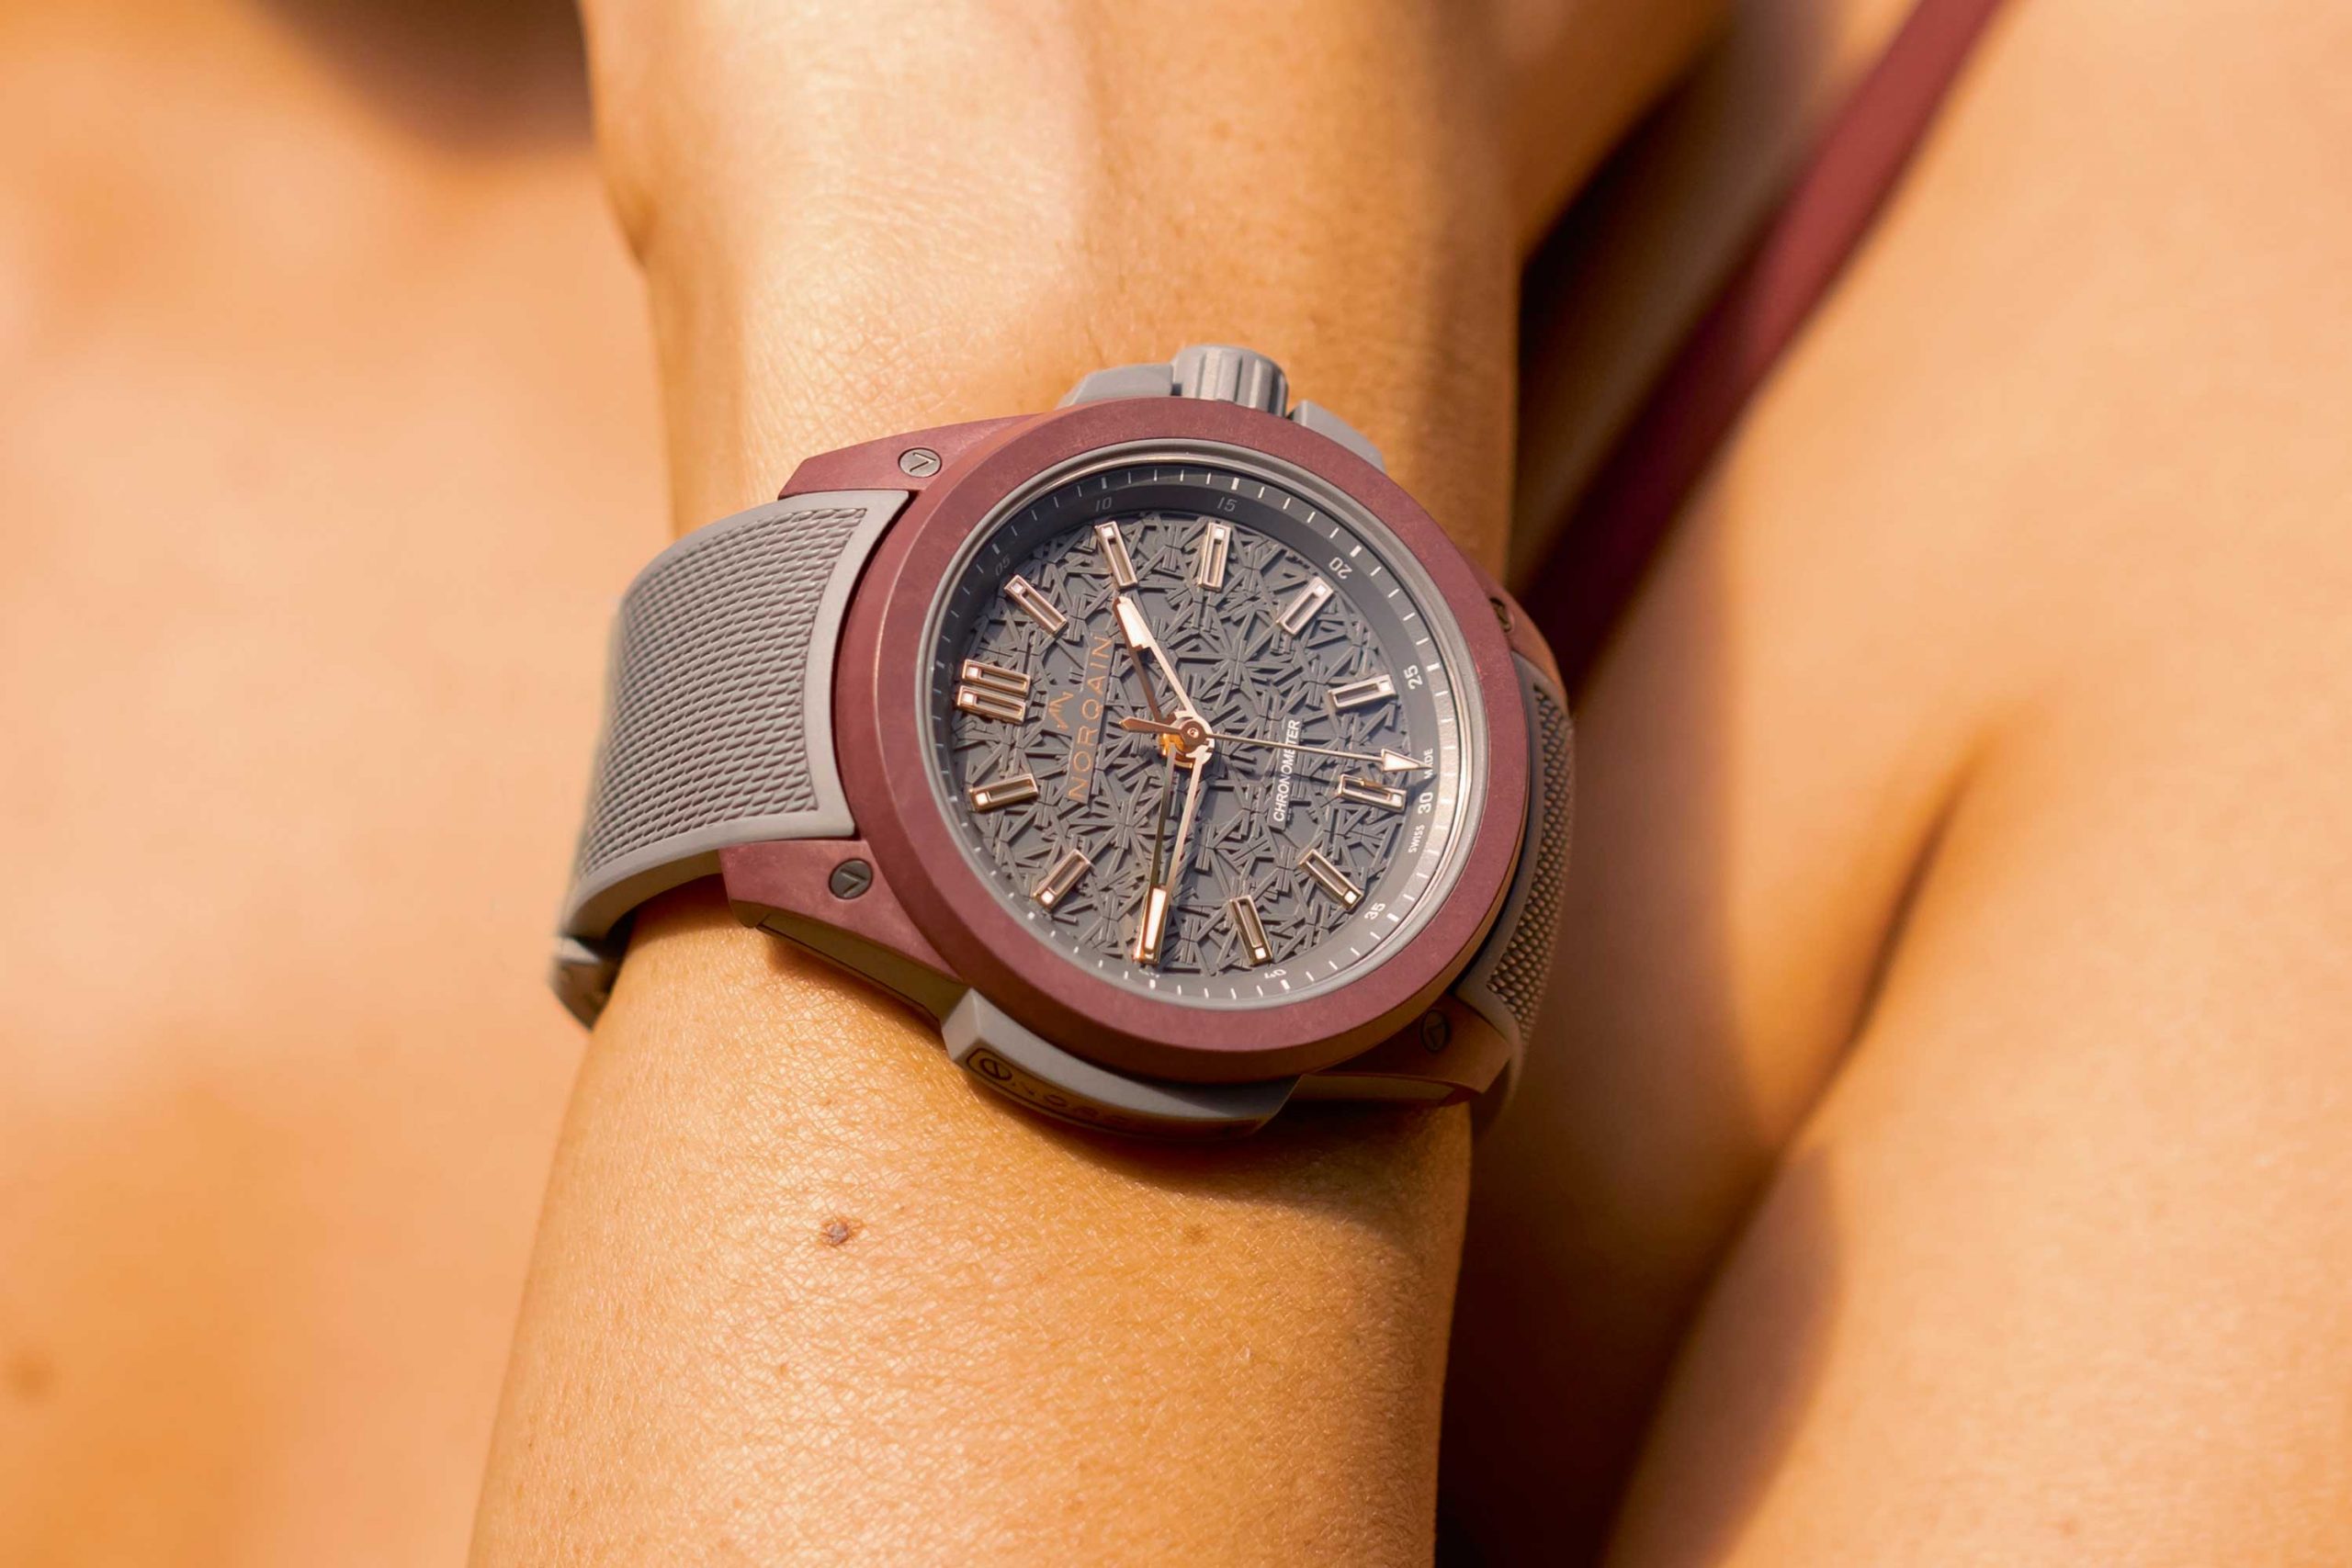 Wild ONE Burgundy & Gray with a gray dial with a mandala-like pattern